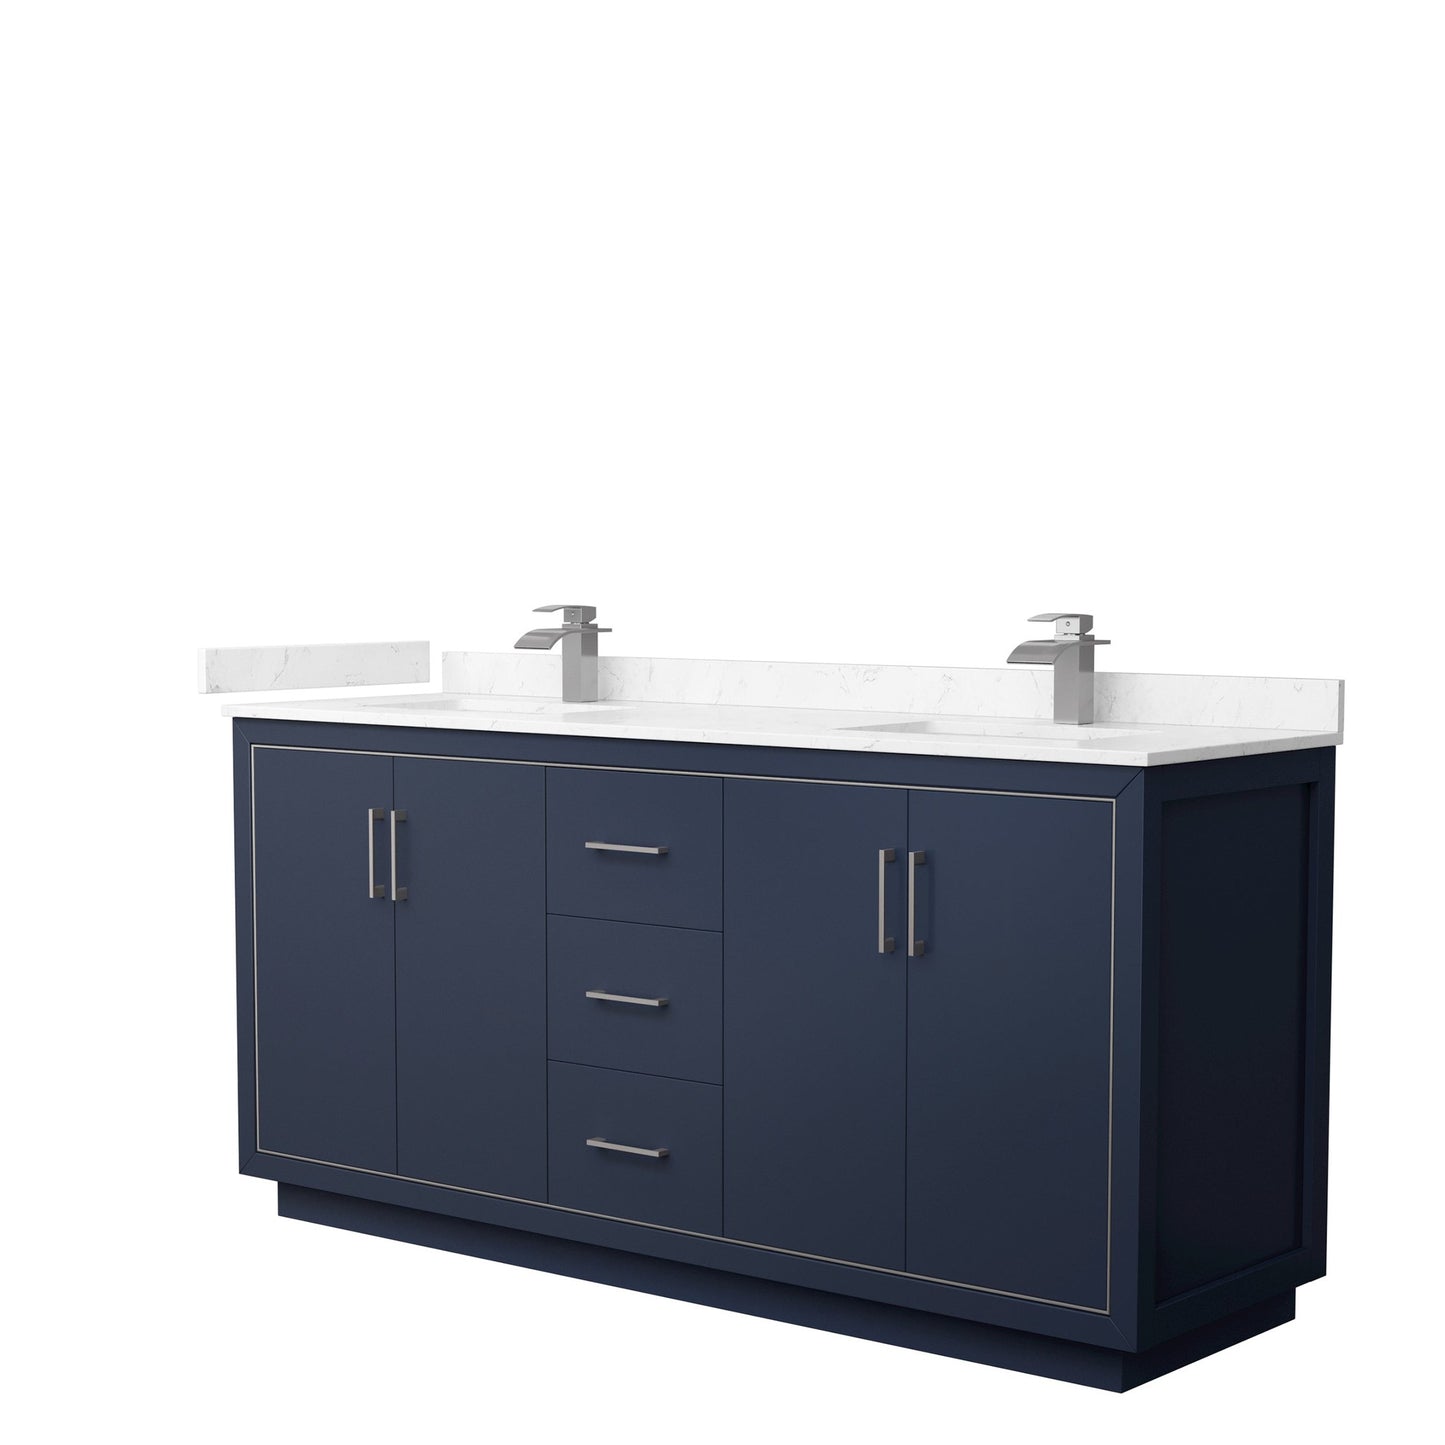 Wyndham Collection Icon 72" Double Bathroom Vanity in Dark Blue, Carrara Cultured Marble Countertop, Undermount Square Sinks, Brushed Nickel Trim